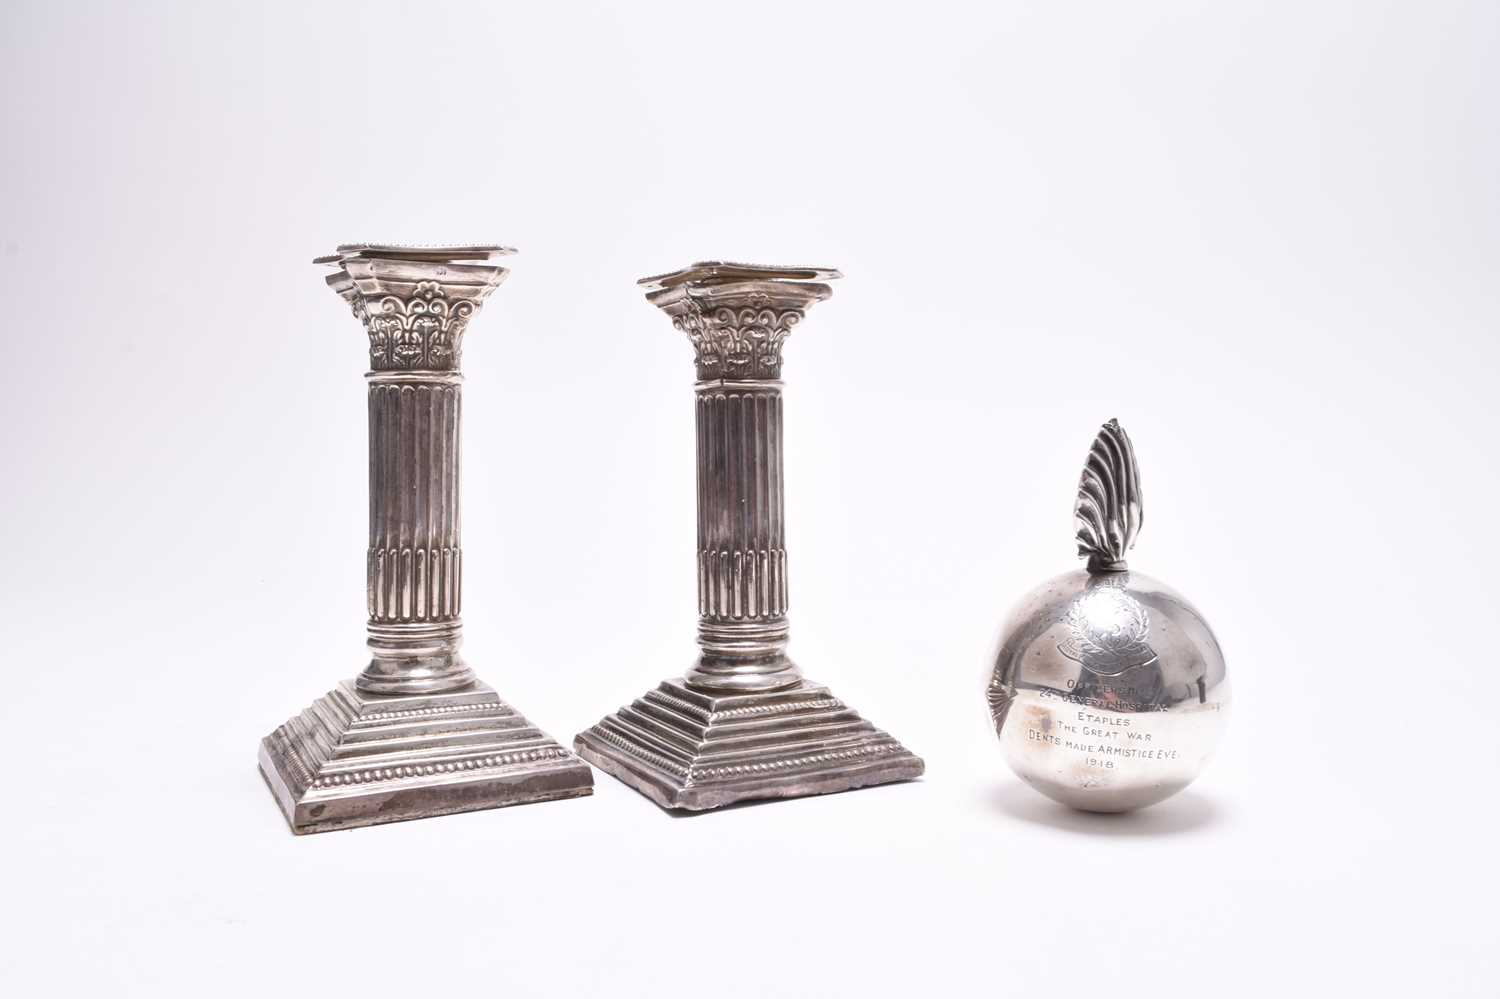 A novelty silver table lighter in the form of a bomb and two candlesticks